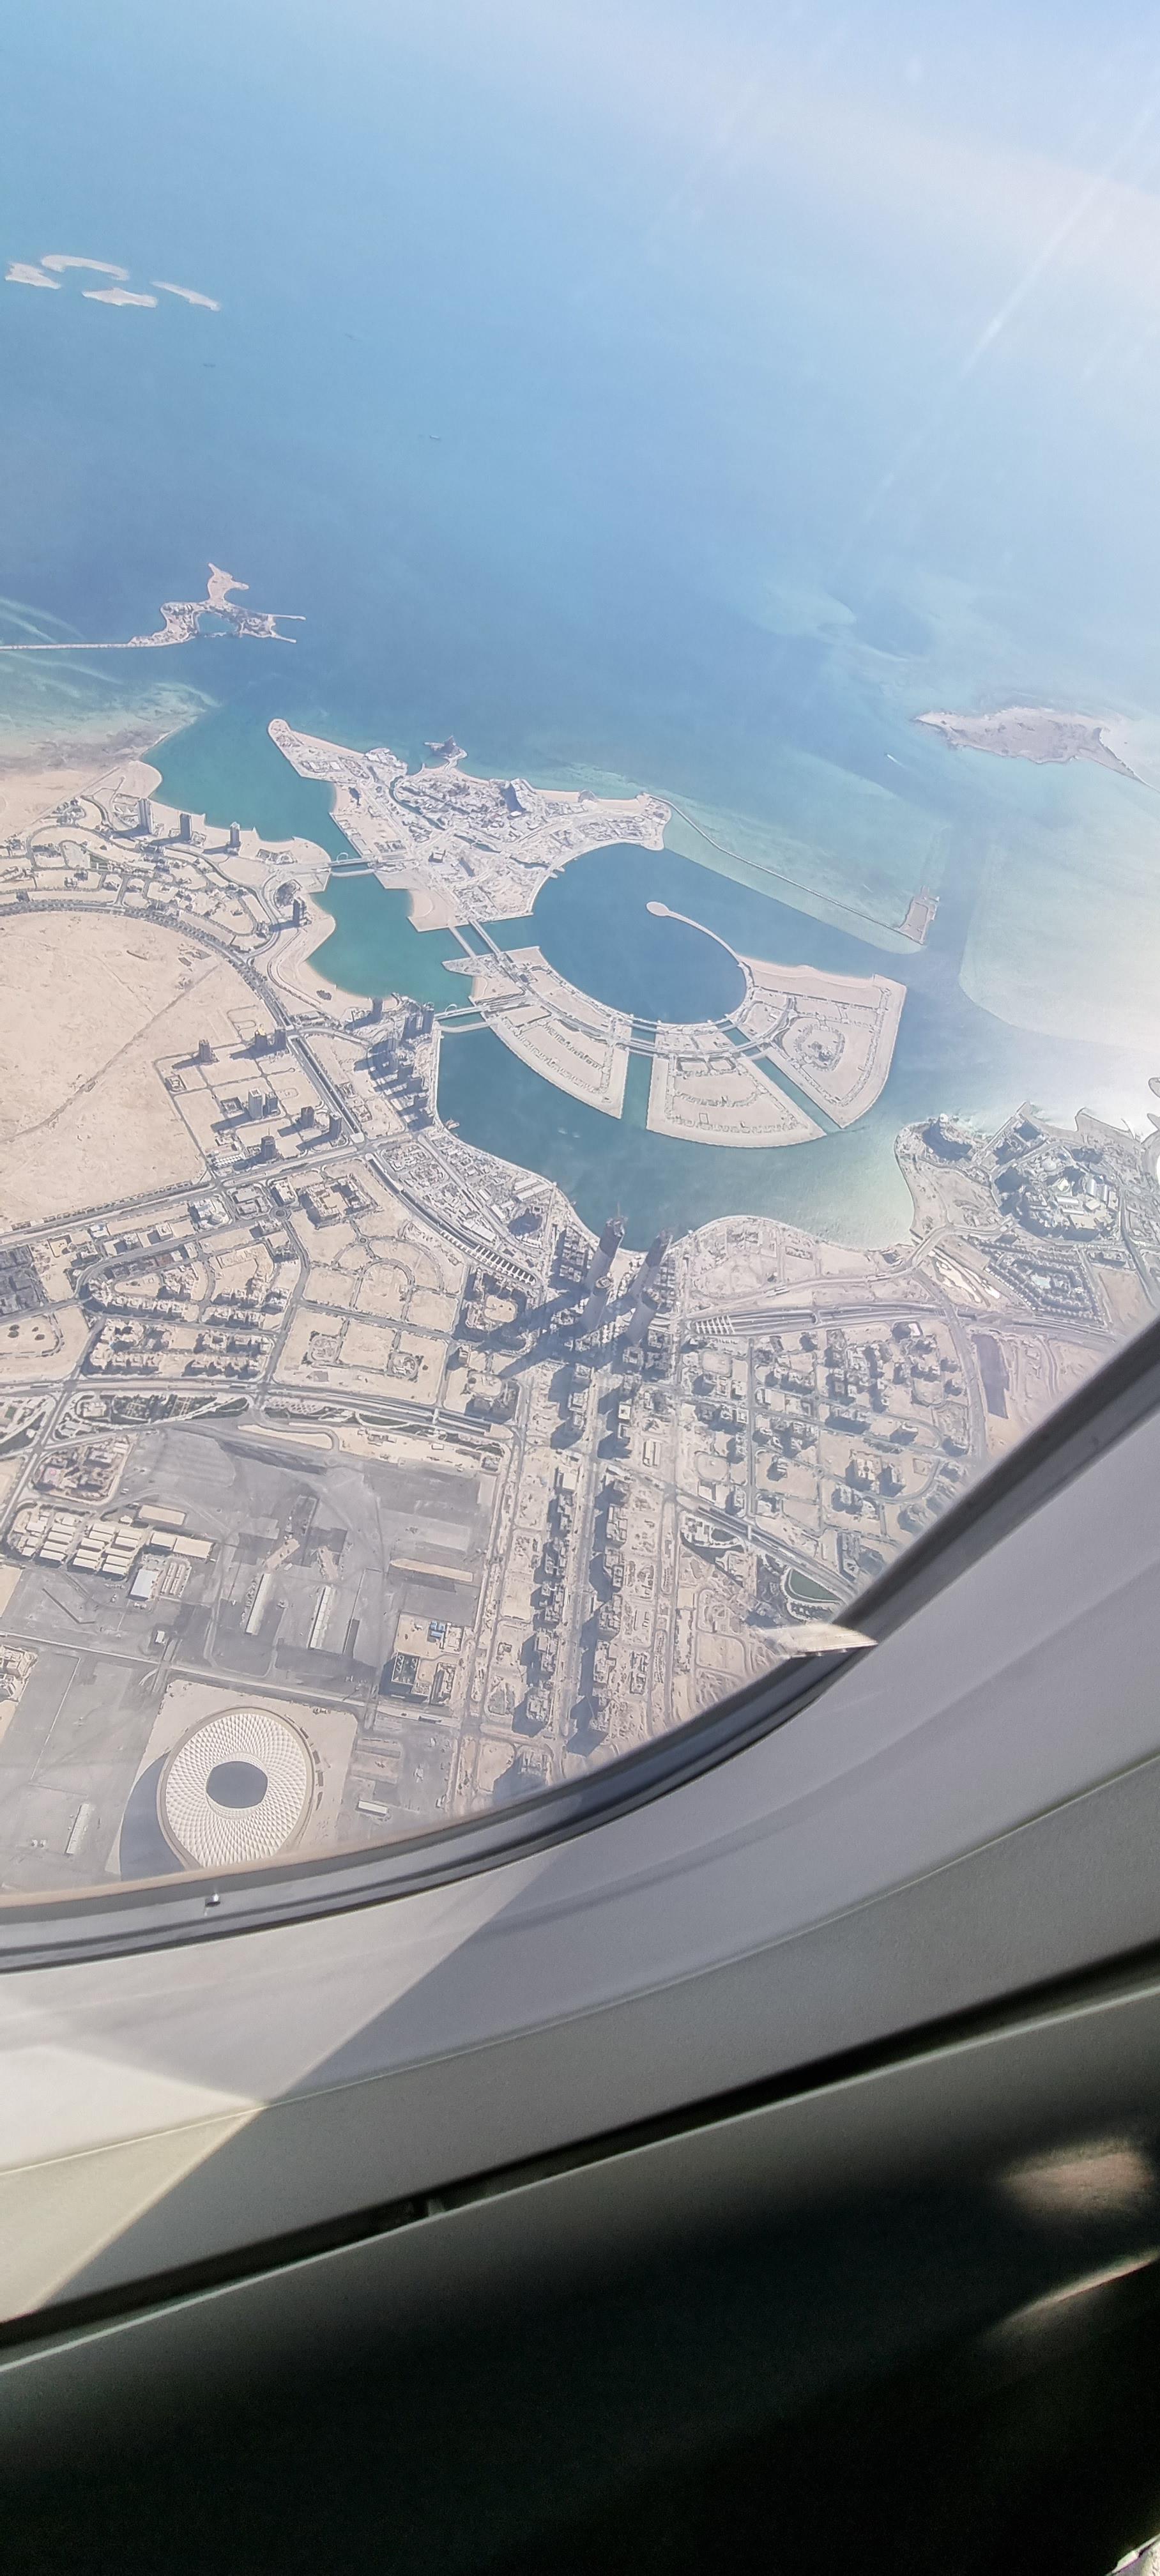 Qatar – Seems like a great place for the World Cup